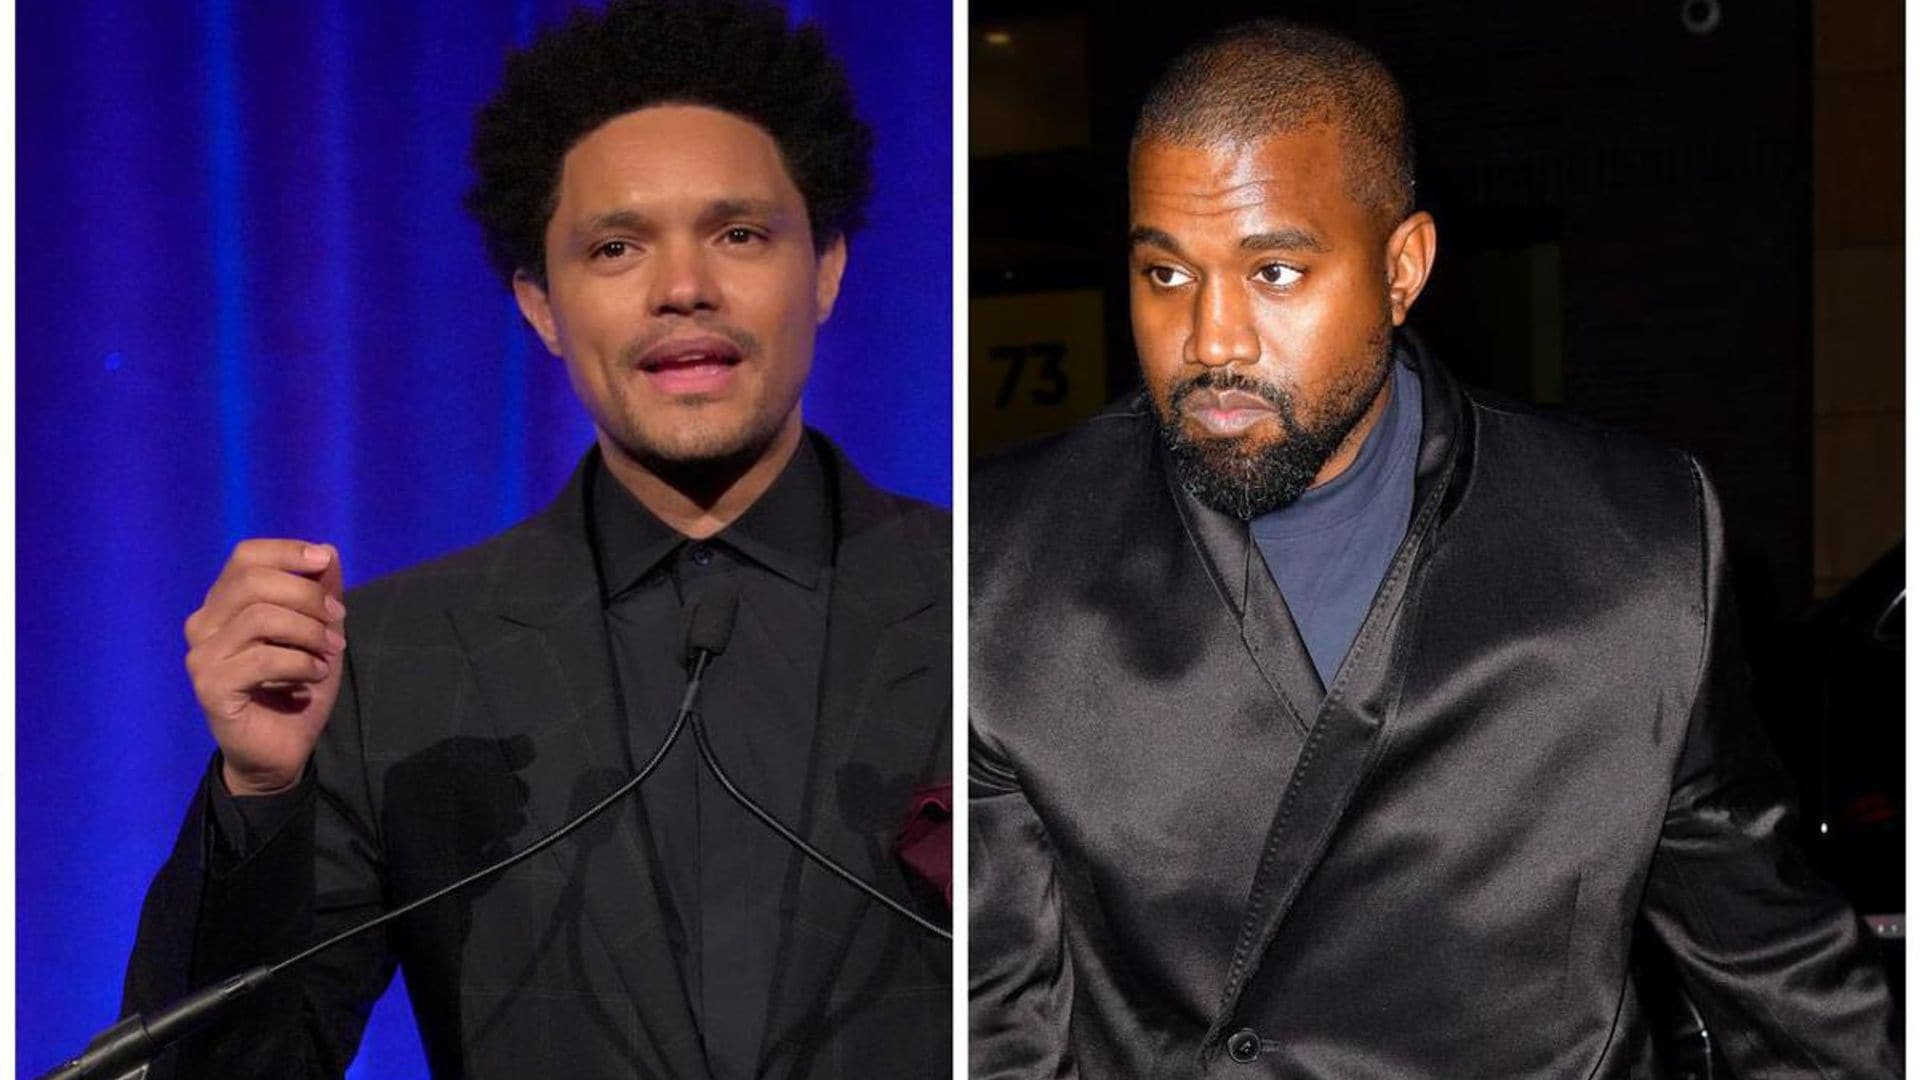 Trevor Noah defends Kanye West after the singer was banned from performing at the Grammys